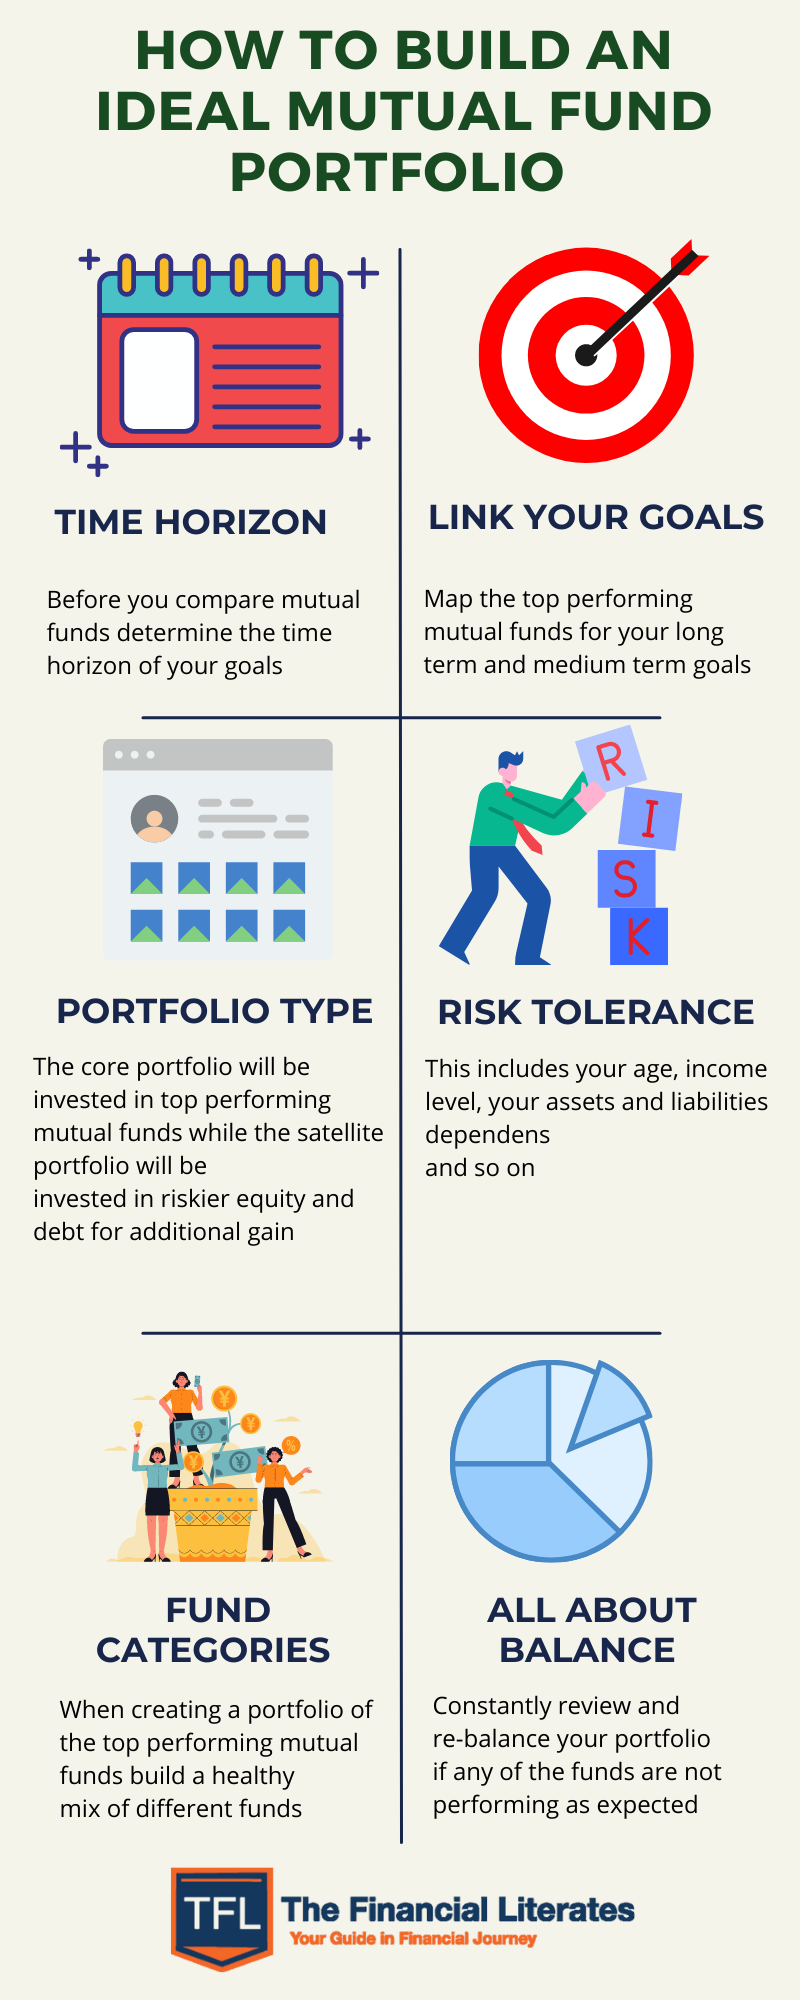 How Healthy Is Your Mutual Fund Portfolio